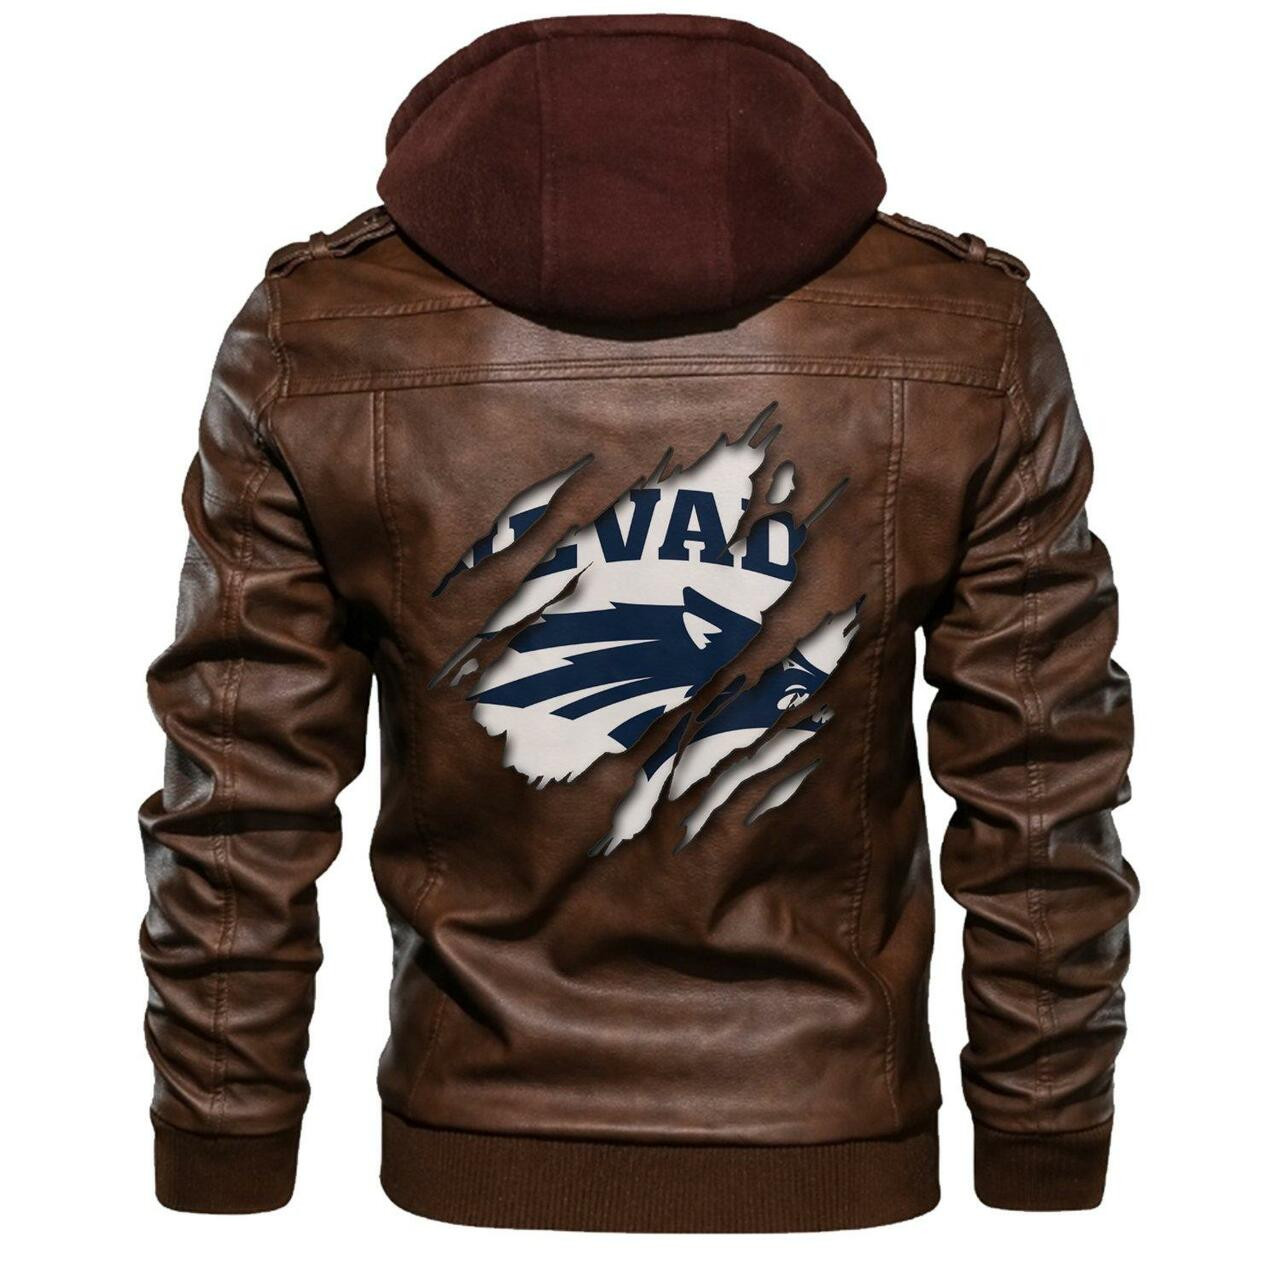 Nice leather jacket For you 176